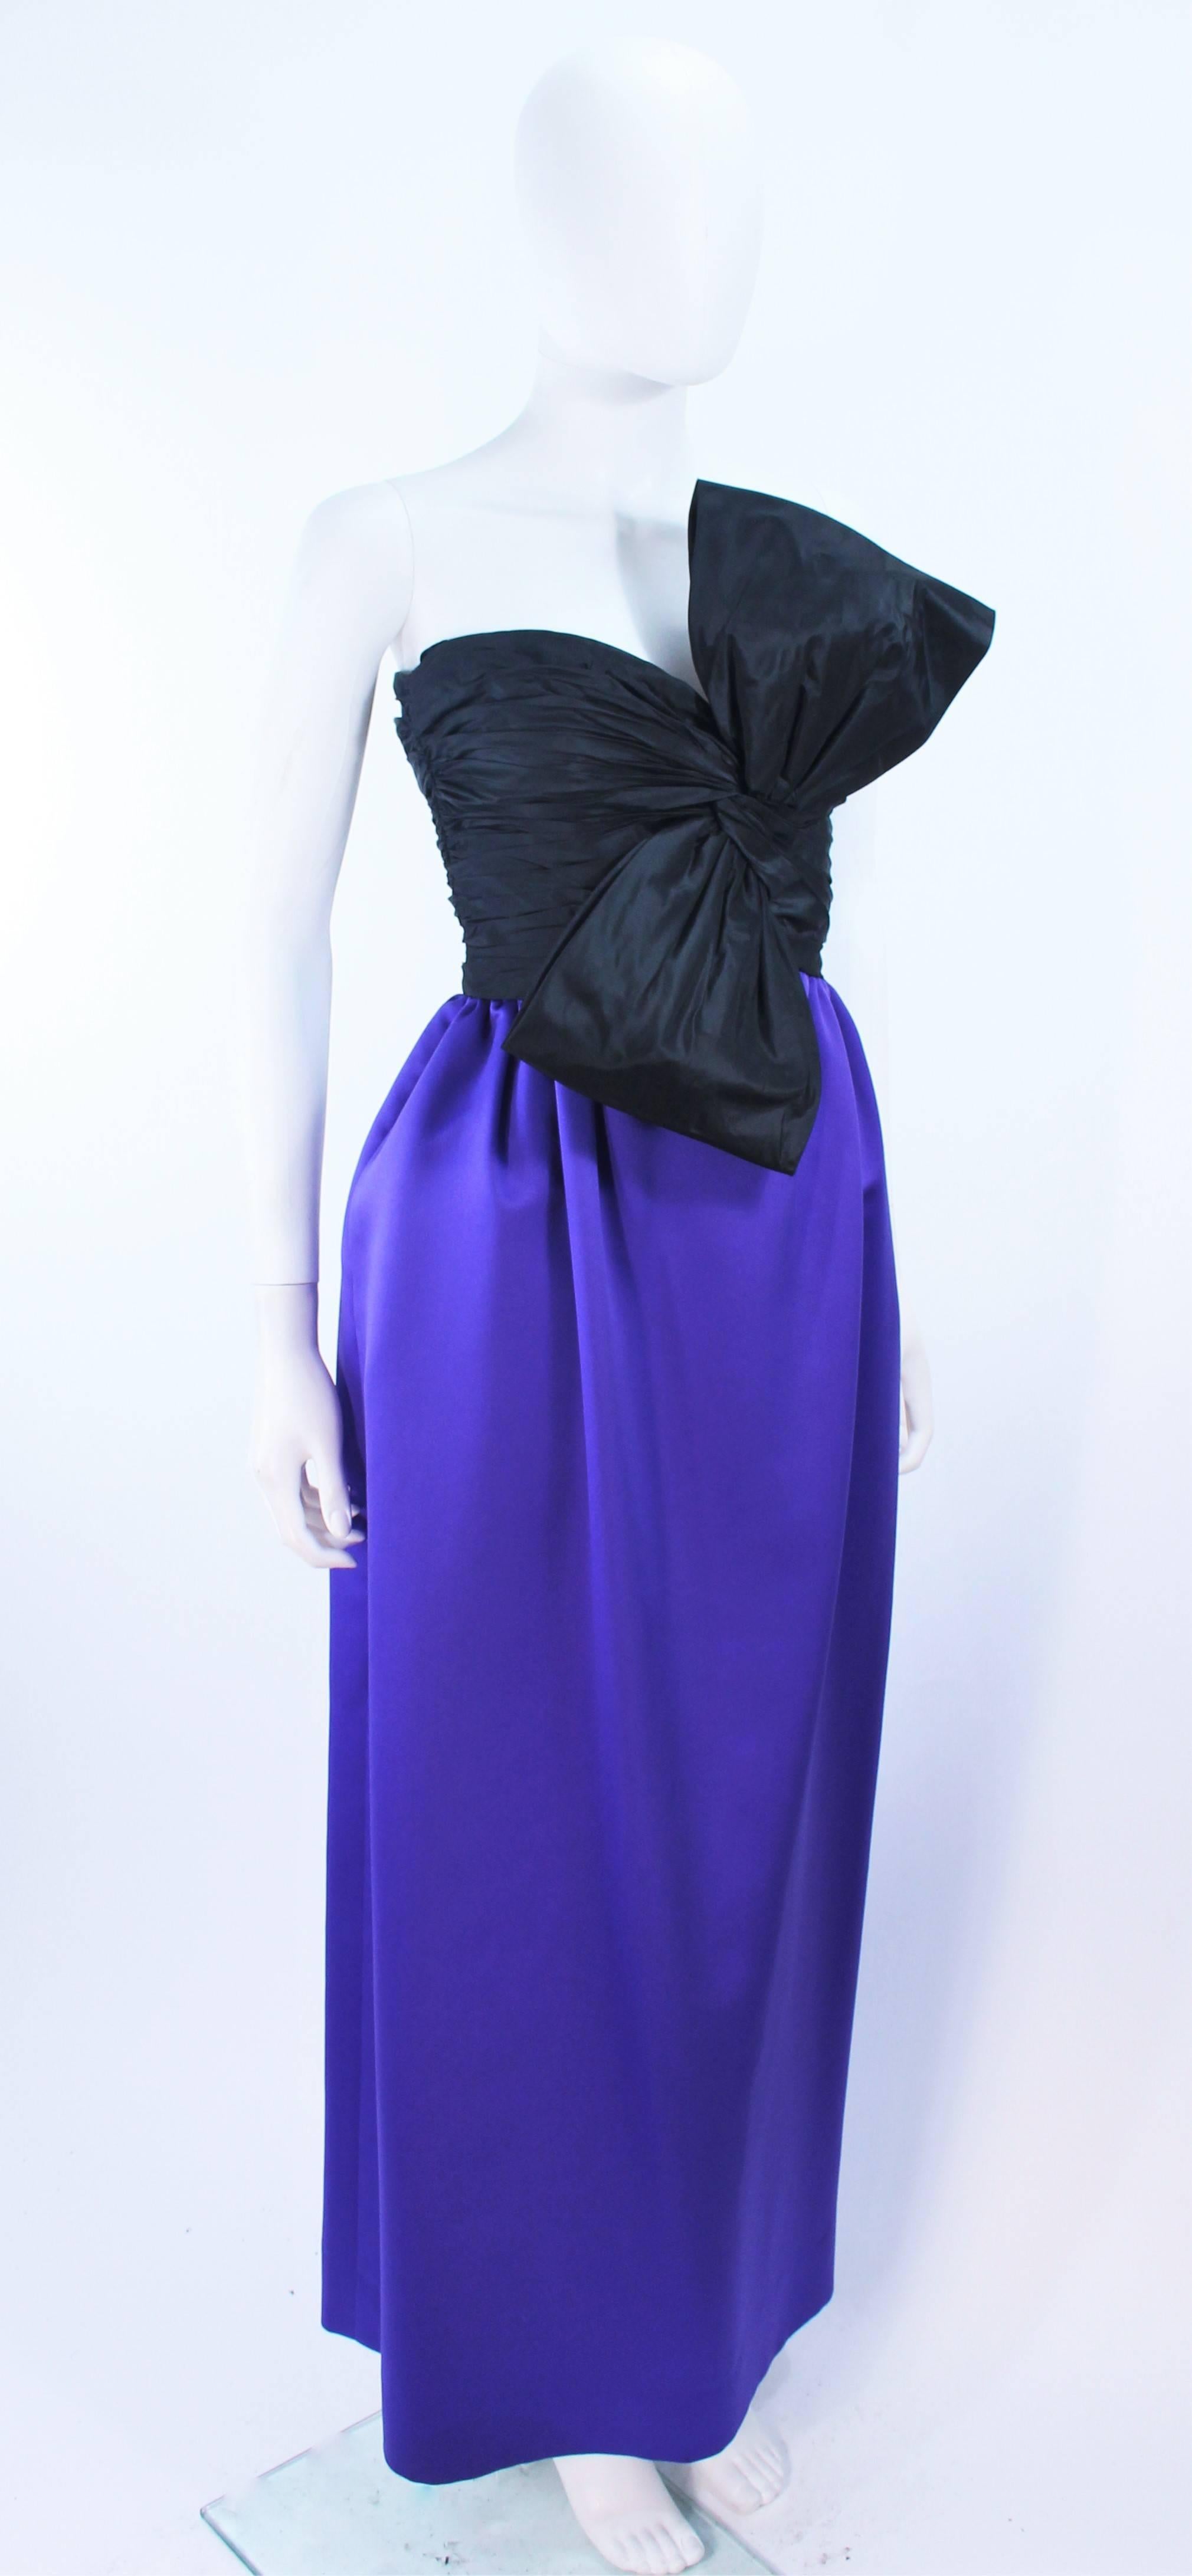 JILL RICHARDS Black and Purple Satin Gown with Bow Applique Size 4 6 1